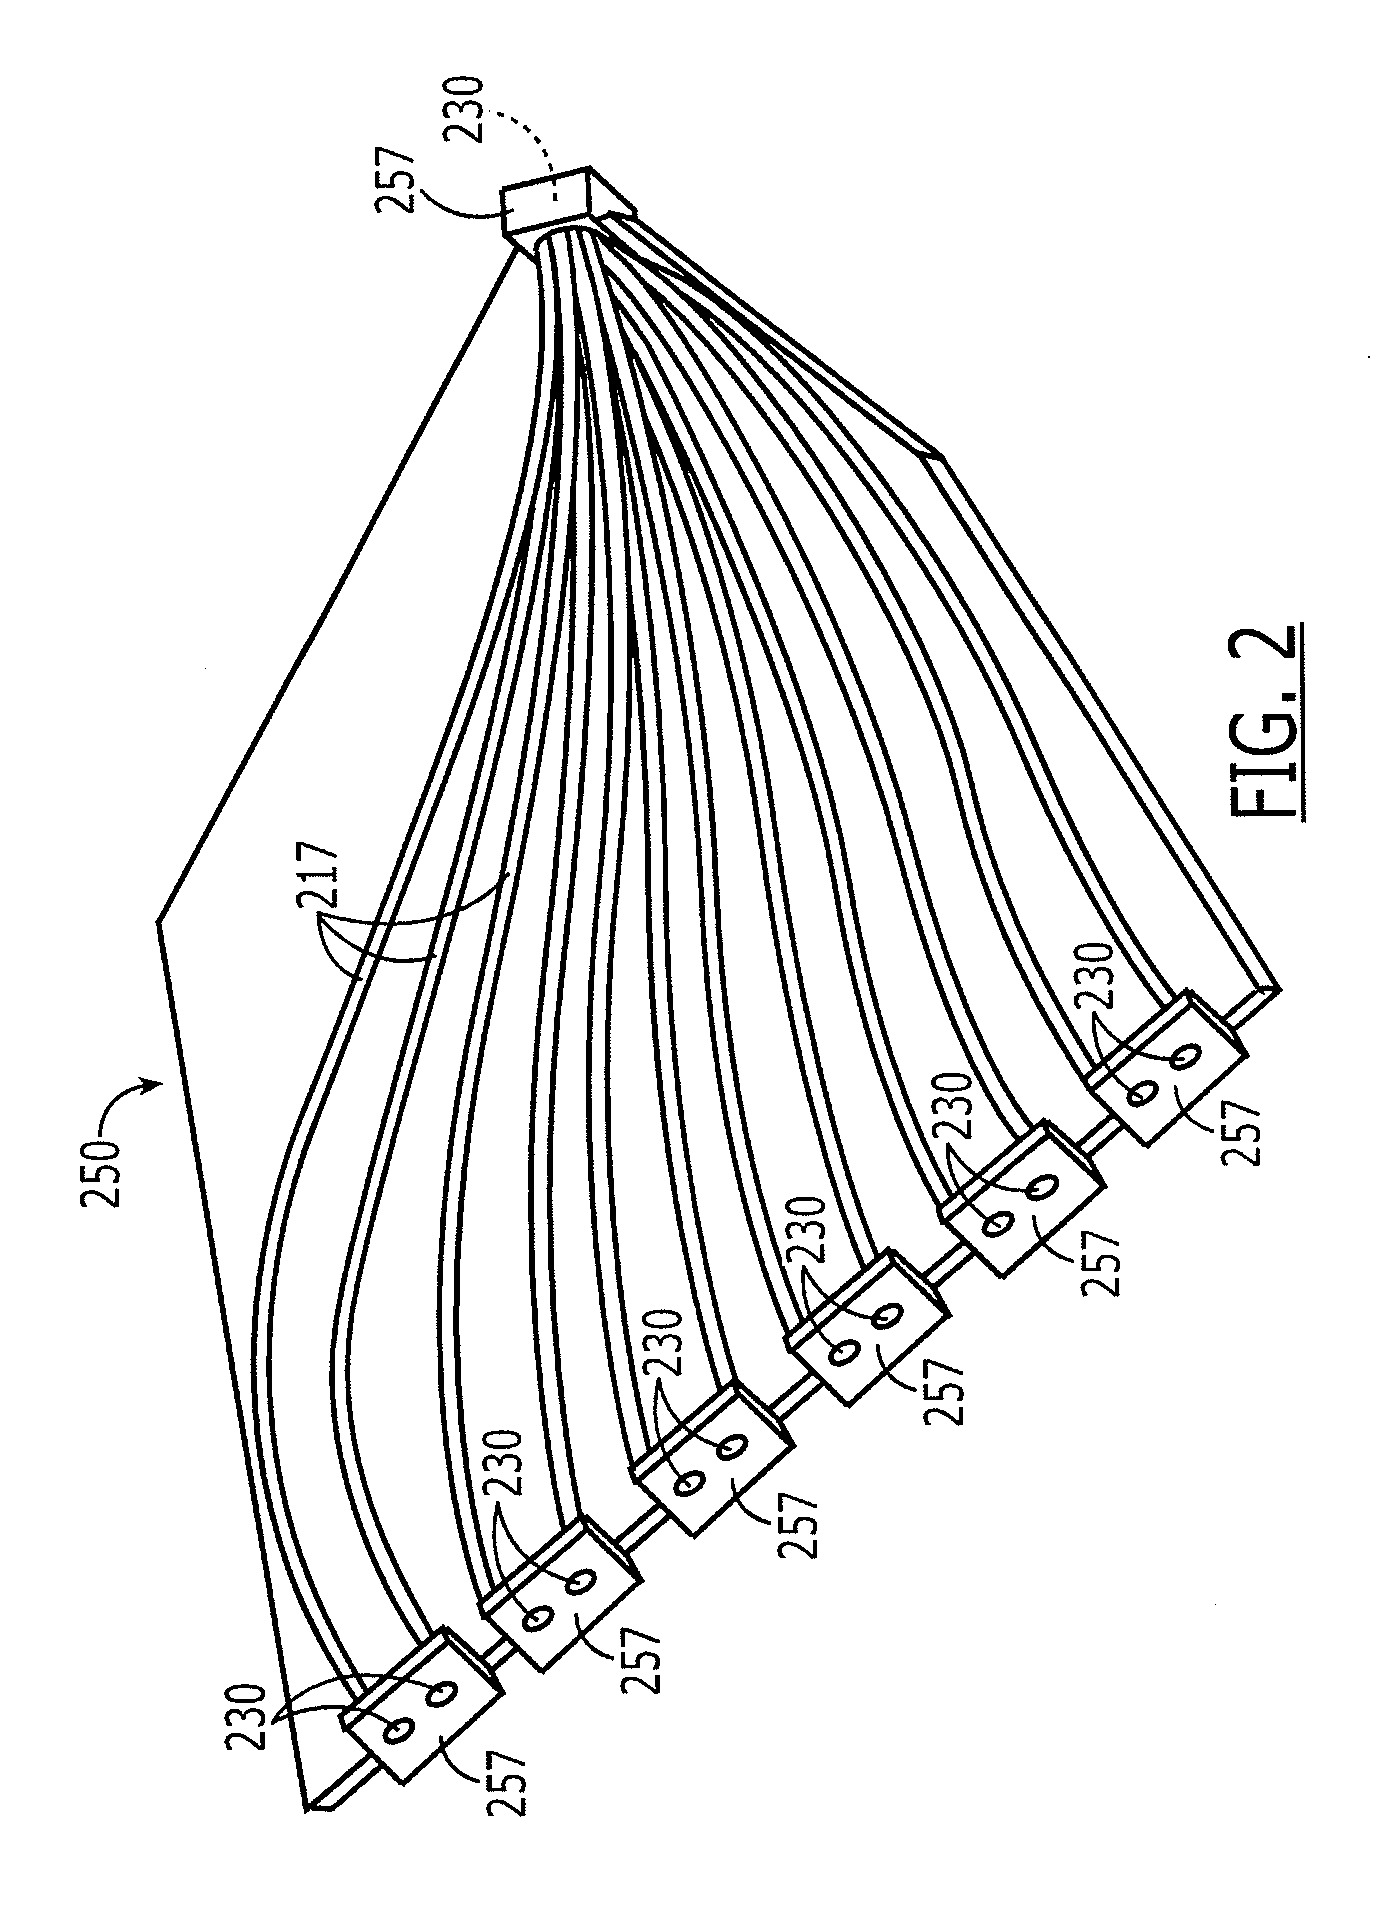 Flexible lensed optical interconnect device for signal distribution